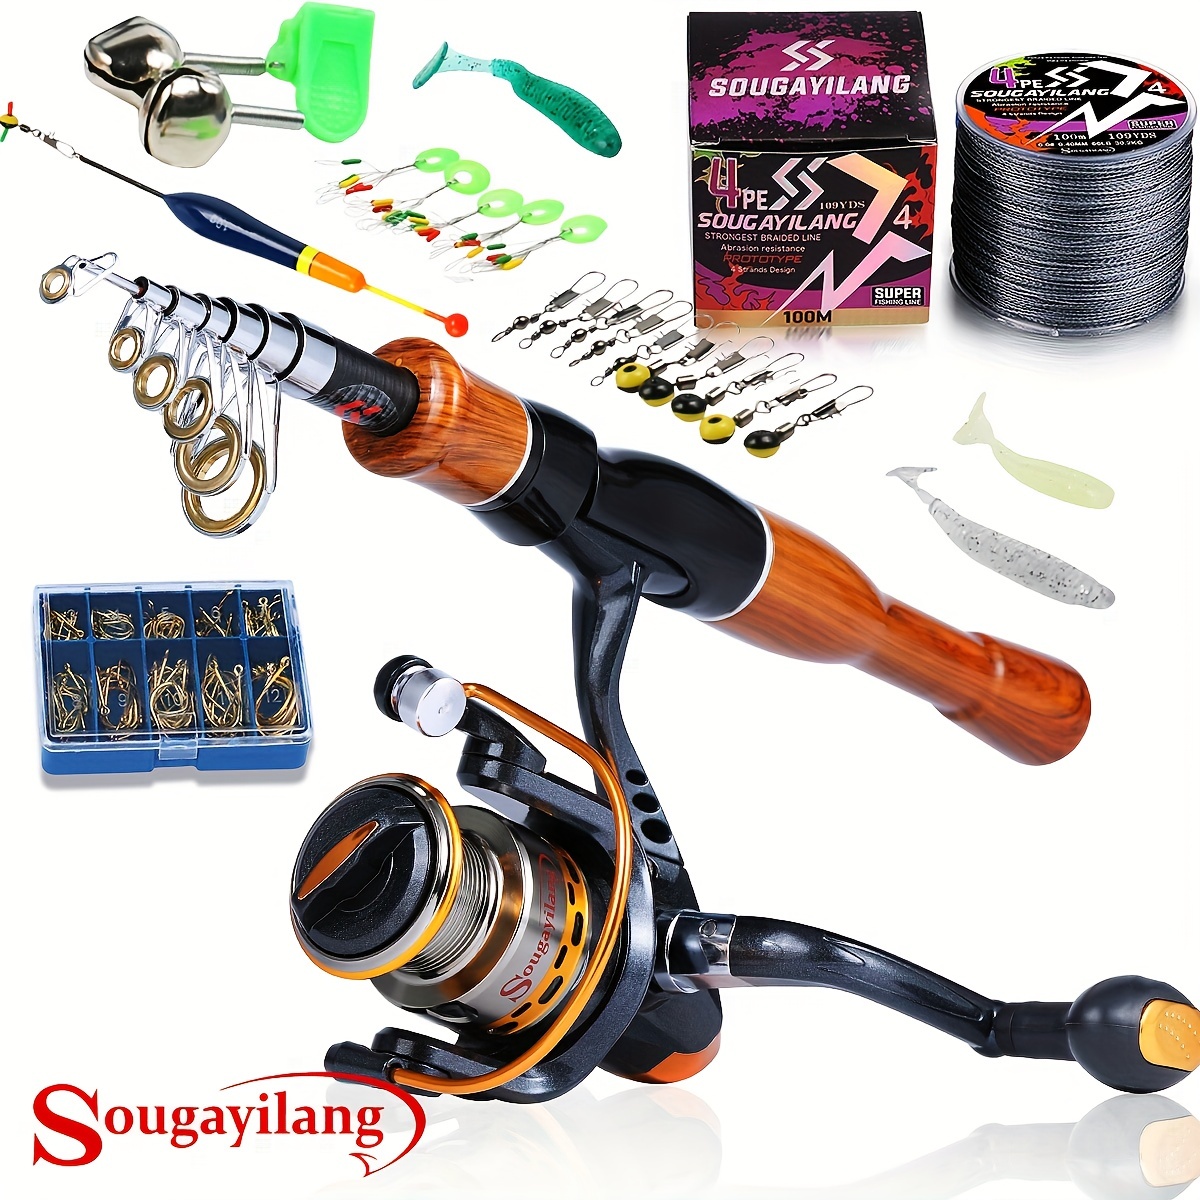 Sougayilang Fishing Rod Combo 1.5M Telescopic Sea Rod Spinning Reel Baits  Lure And 120M 4 Strand Fishing Line Set Travel Fishing Gear Accessories Fishing  Tackle Set